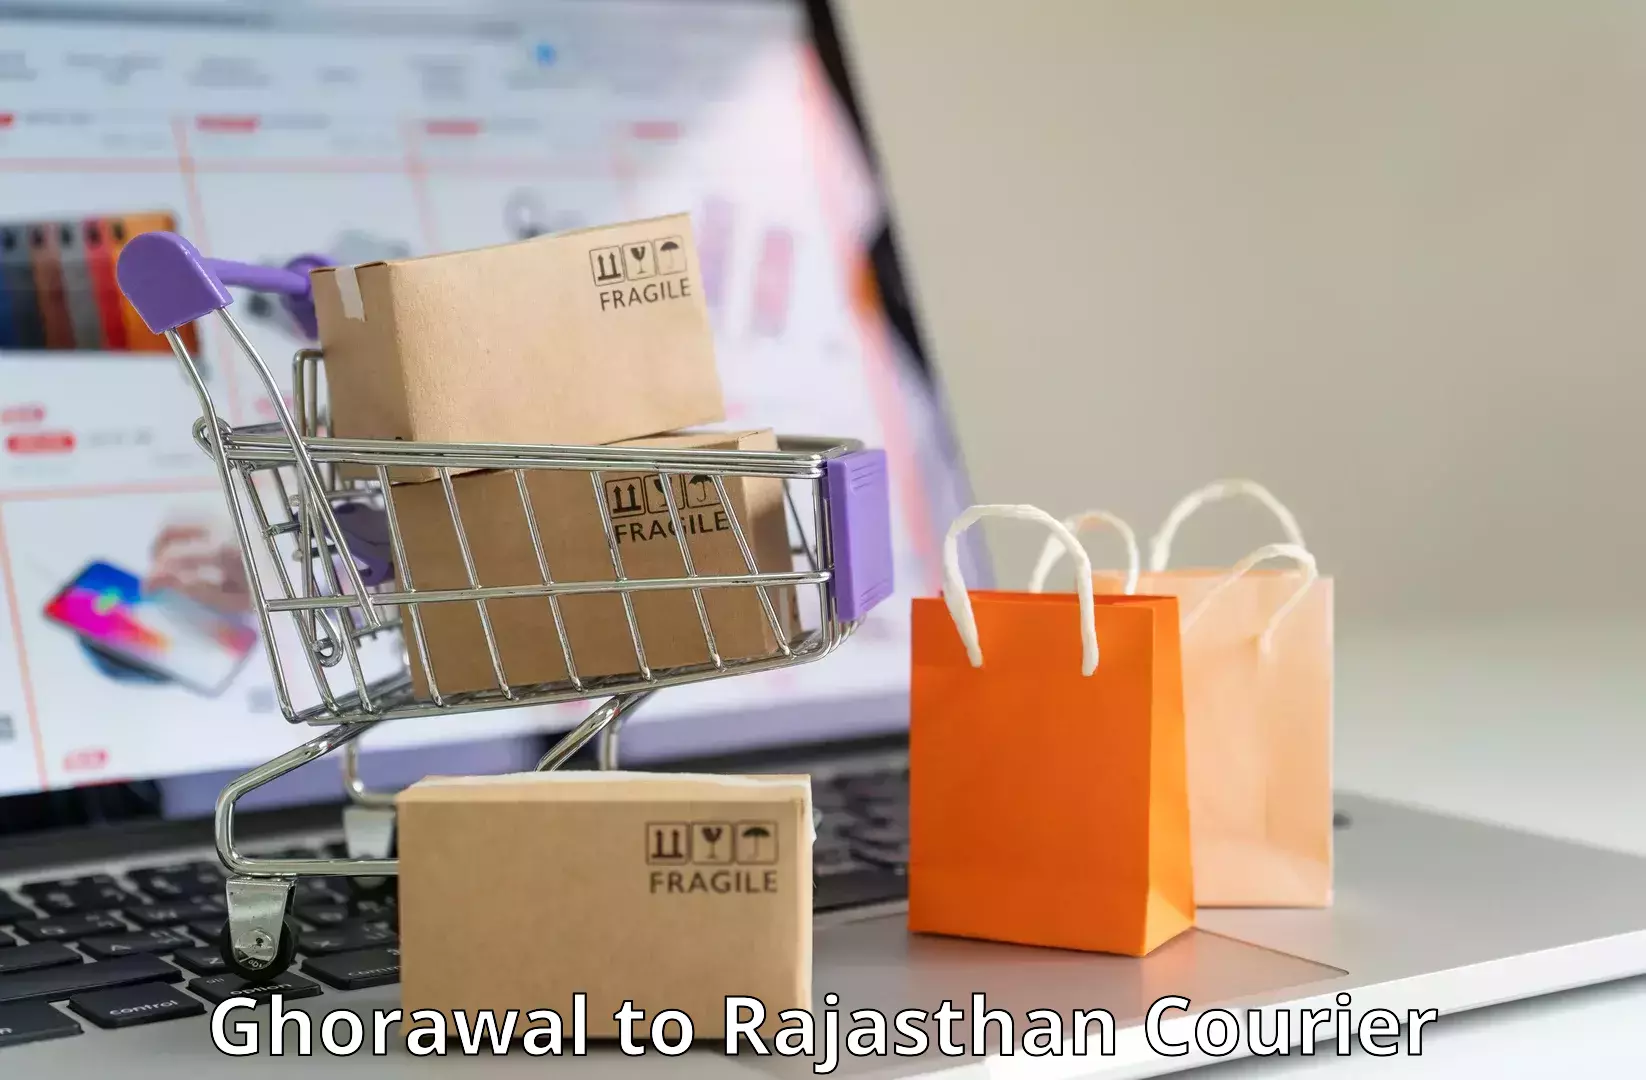 Quality courier partnerships Ghorawal to Rajasthan